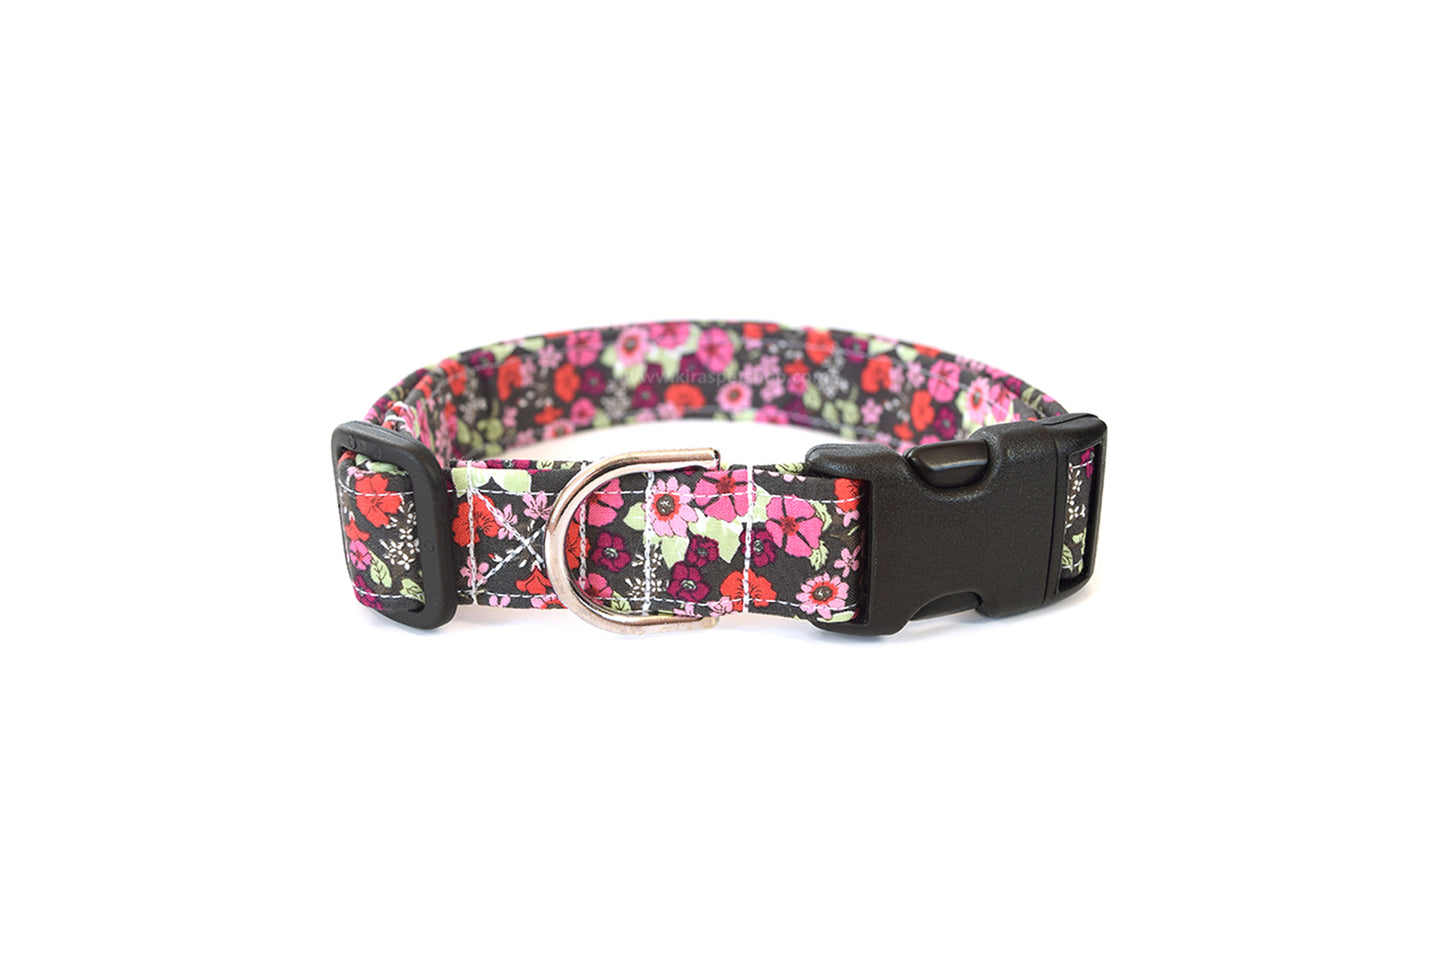 Gray, Red & Pink Floral Dog Collar - Handmade by Kira's Pet Shop